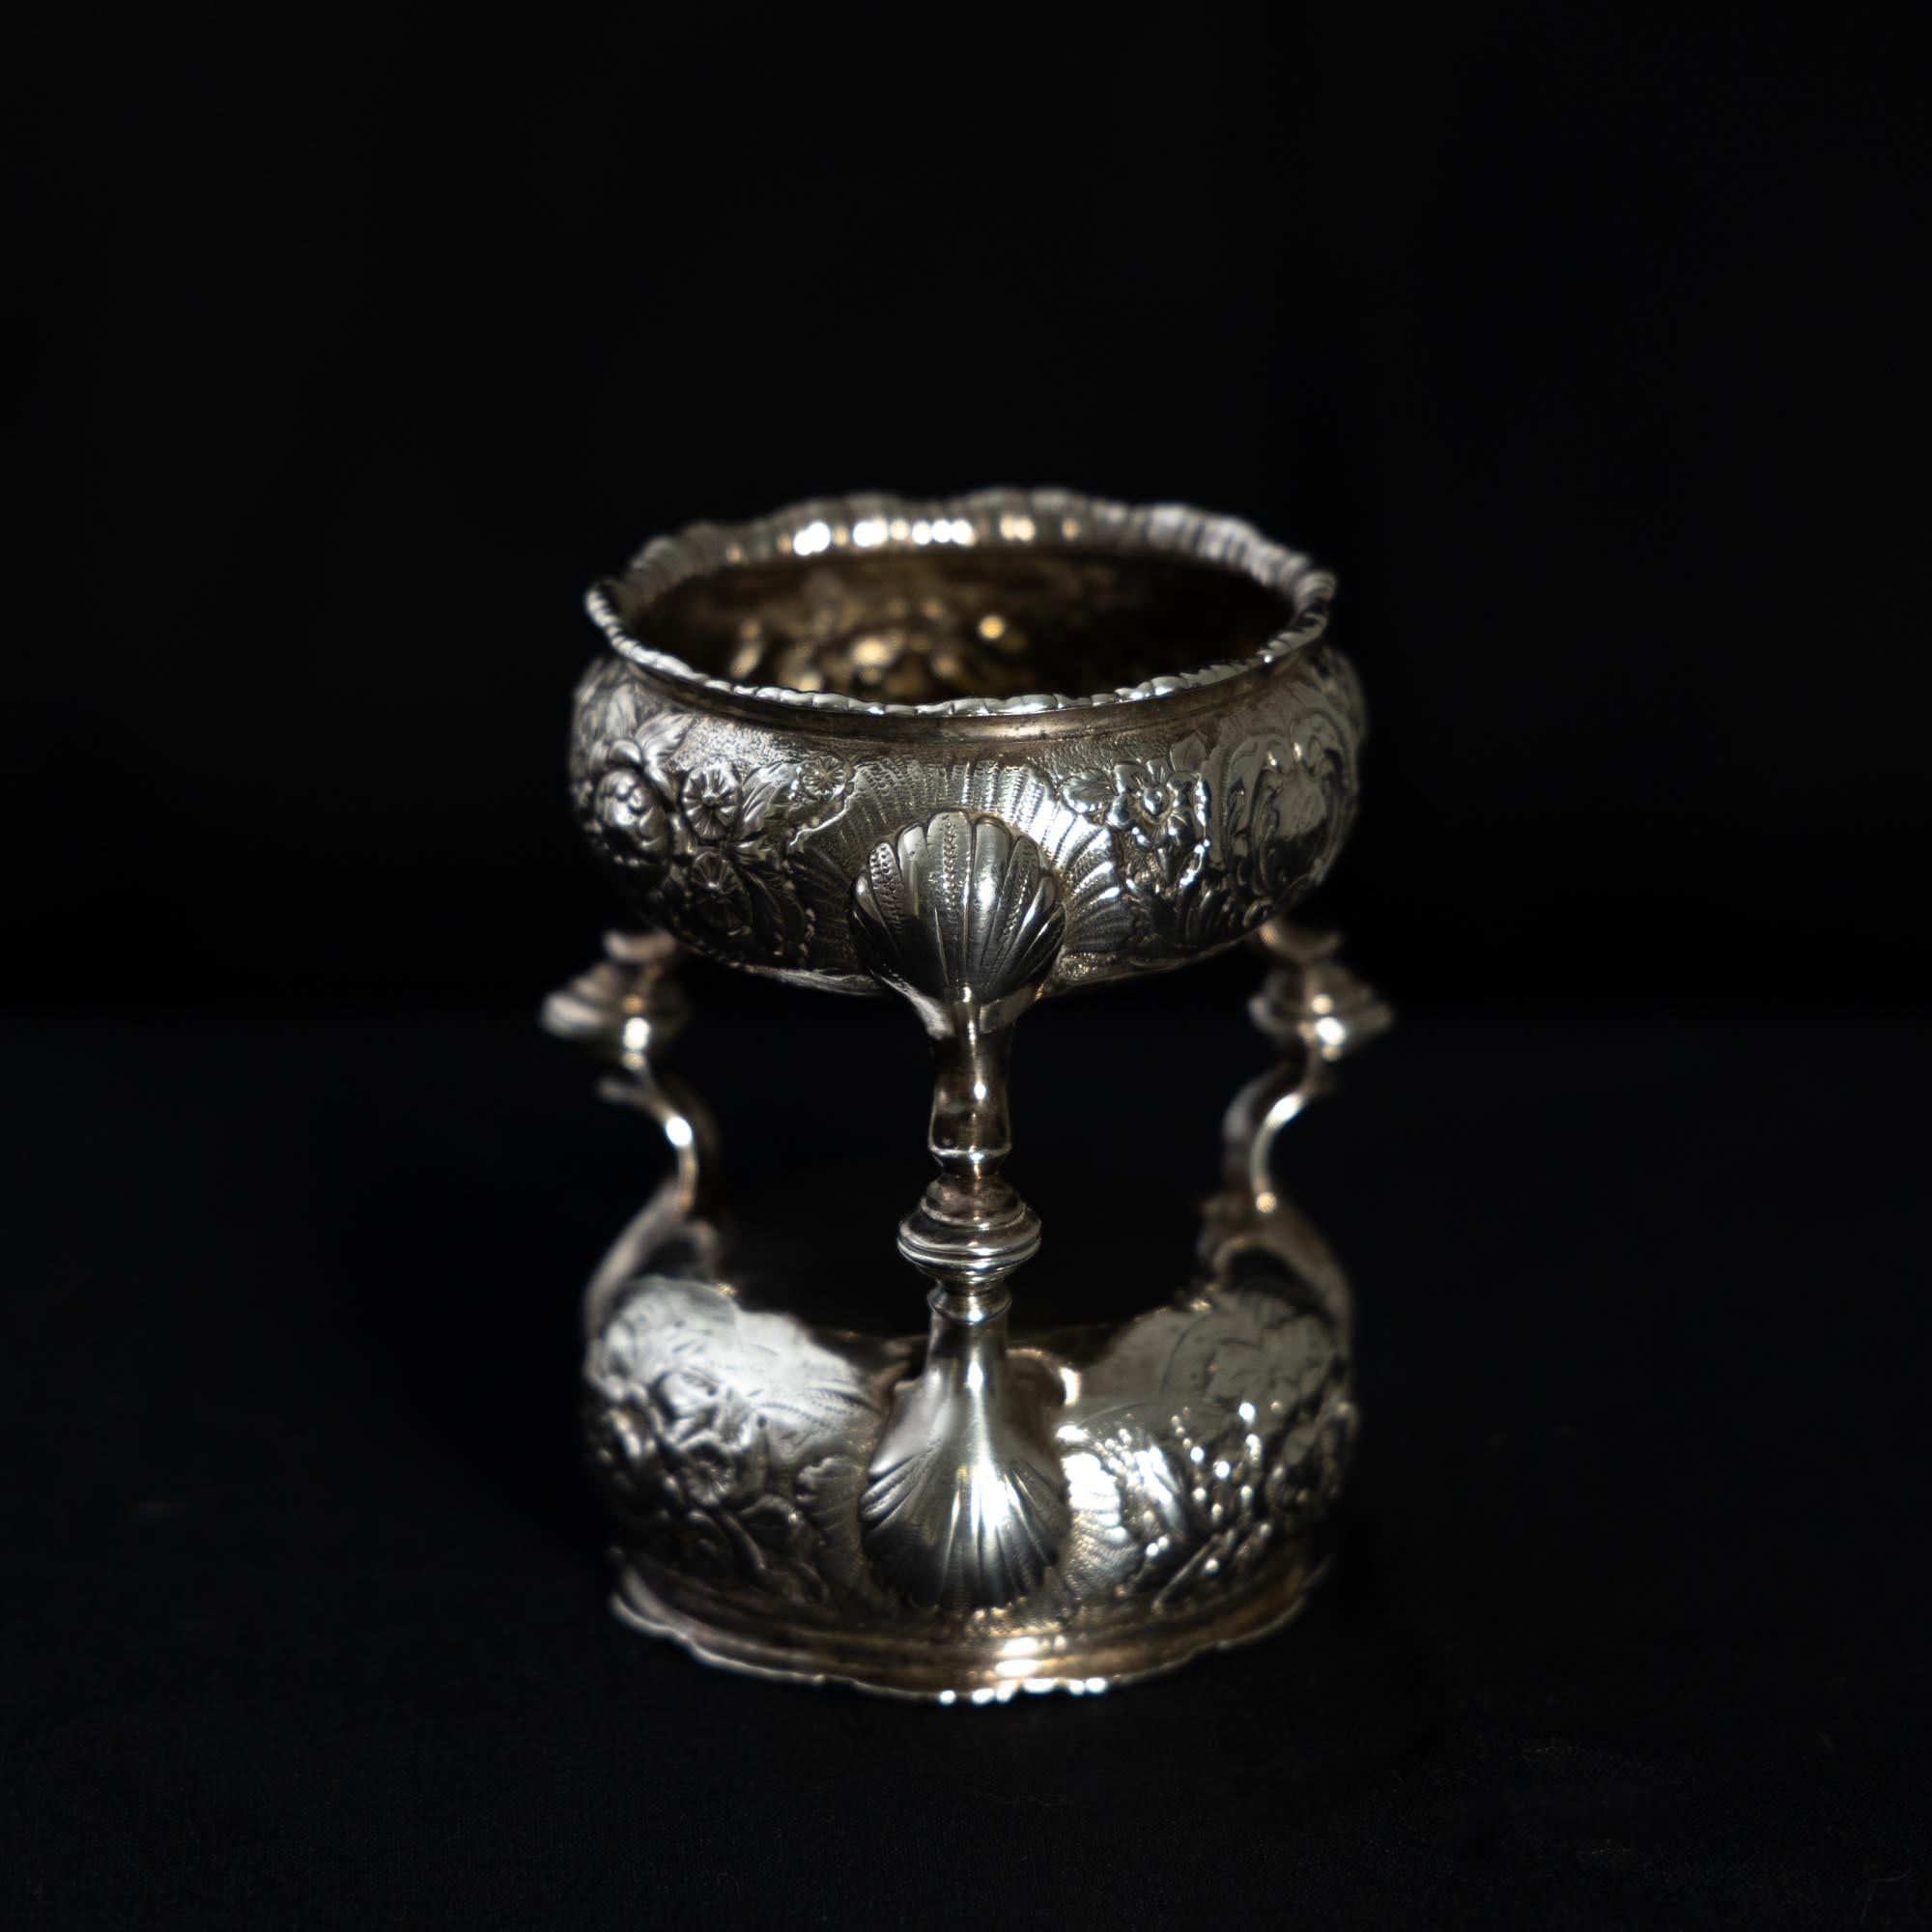 Pair of silver salt vessels on three legs with chased wall with shell and rocaille decorations and wavy lip. The saliers are hallmarked on the underside. Year letter slightly plastered, probably h or n for 1743 and 1748 respectively.